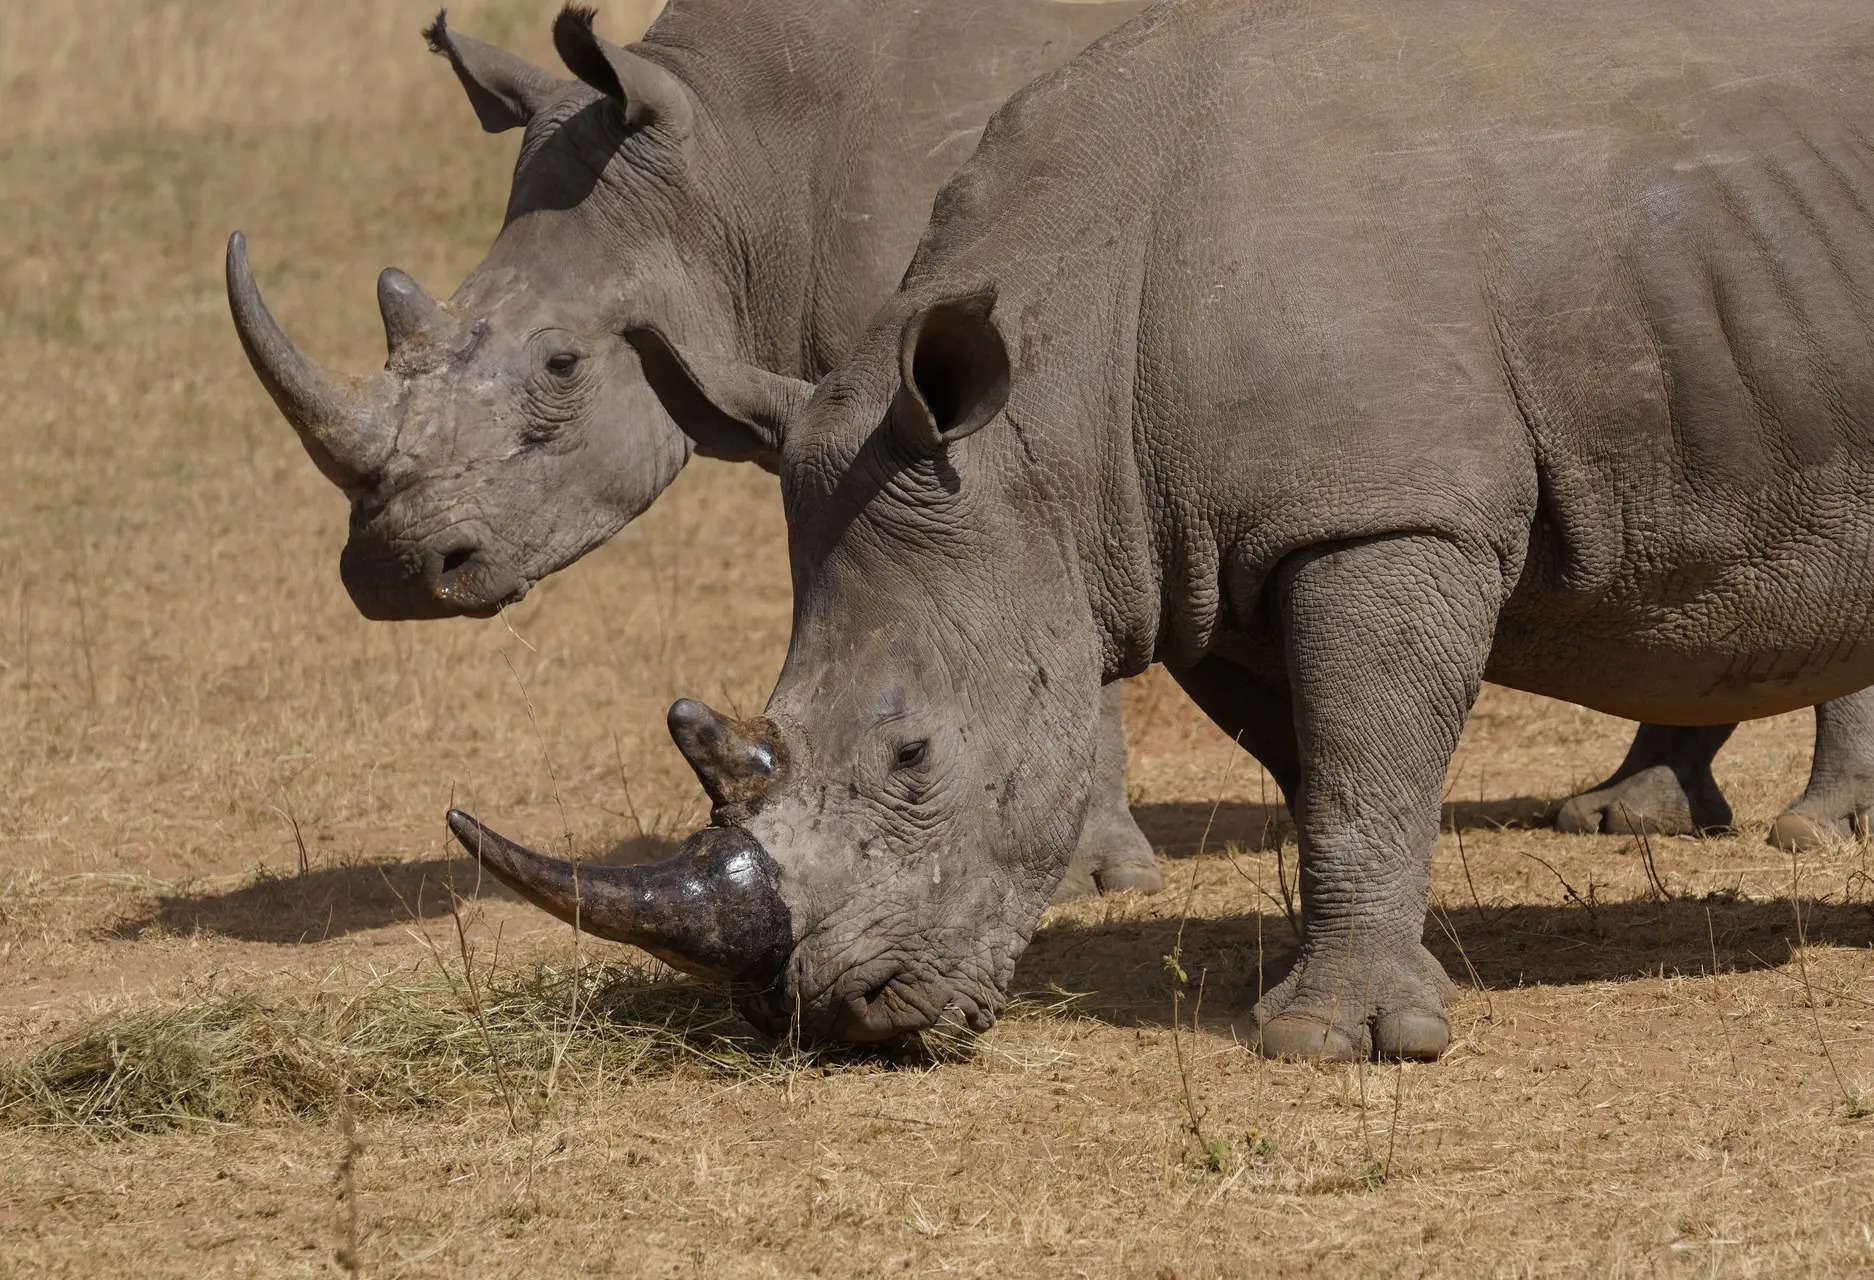 Horns of rhinos implanted with radioactive chips as new measure, but against what? 